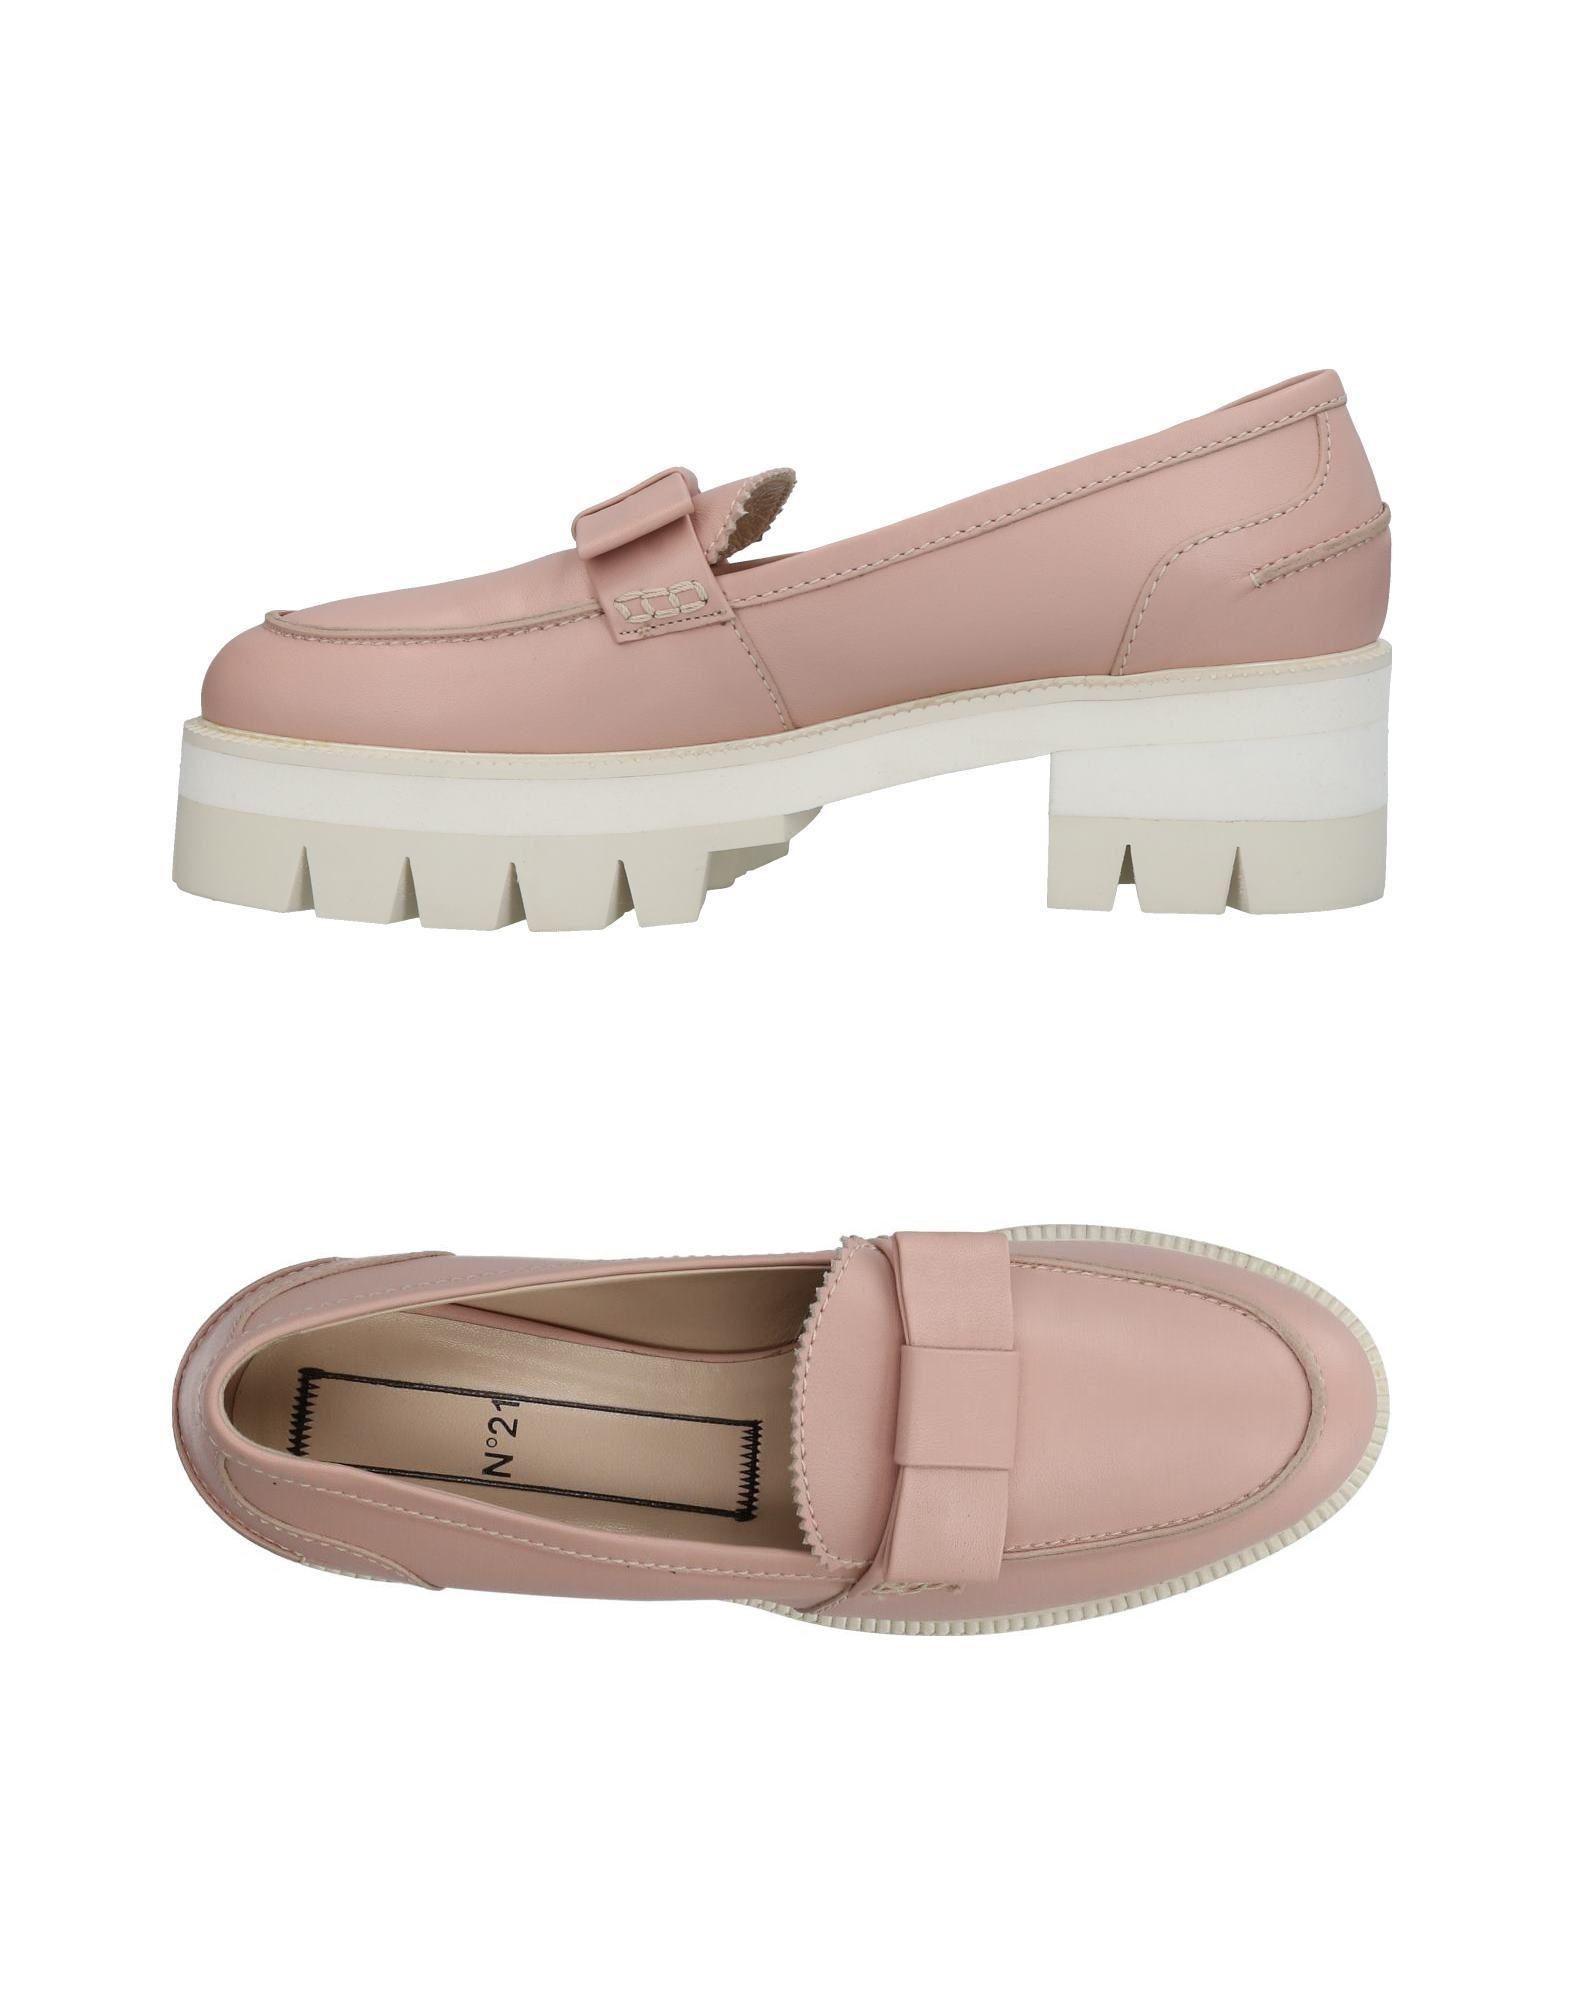 N°21 Rubber Loafer in Pink - Lyst